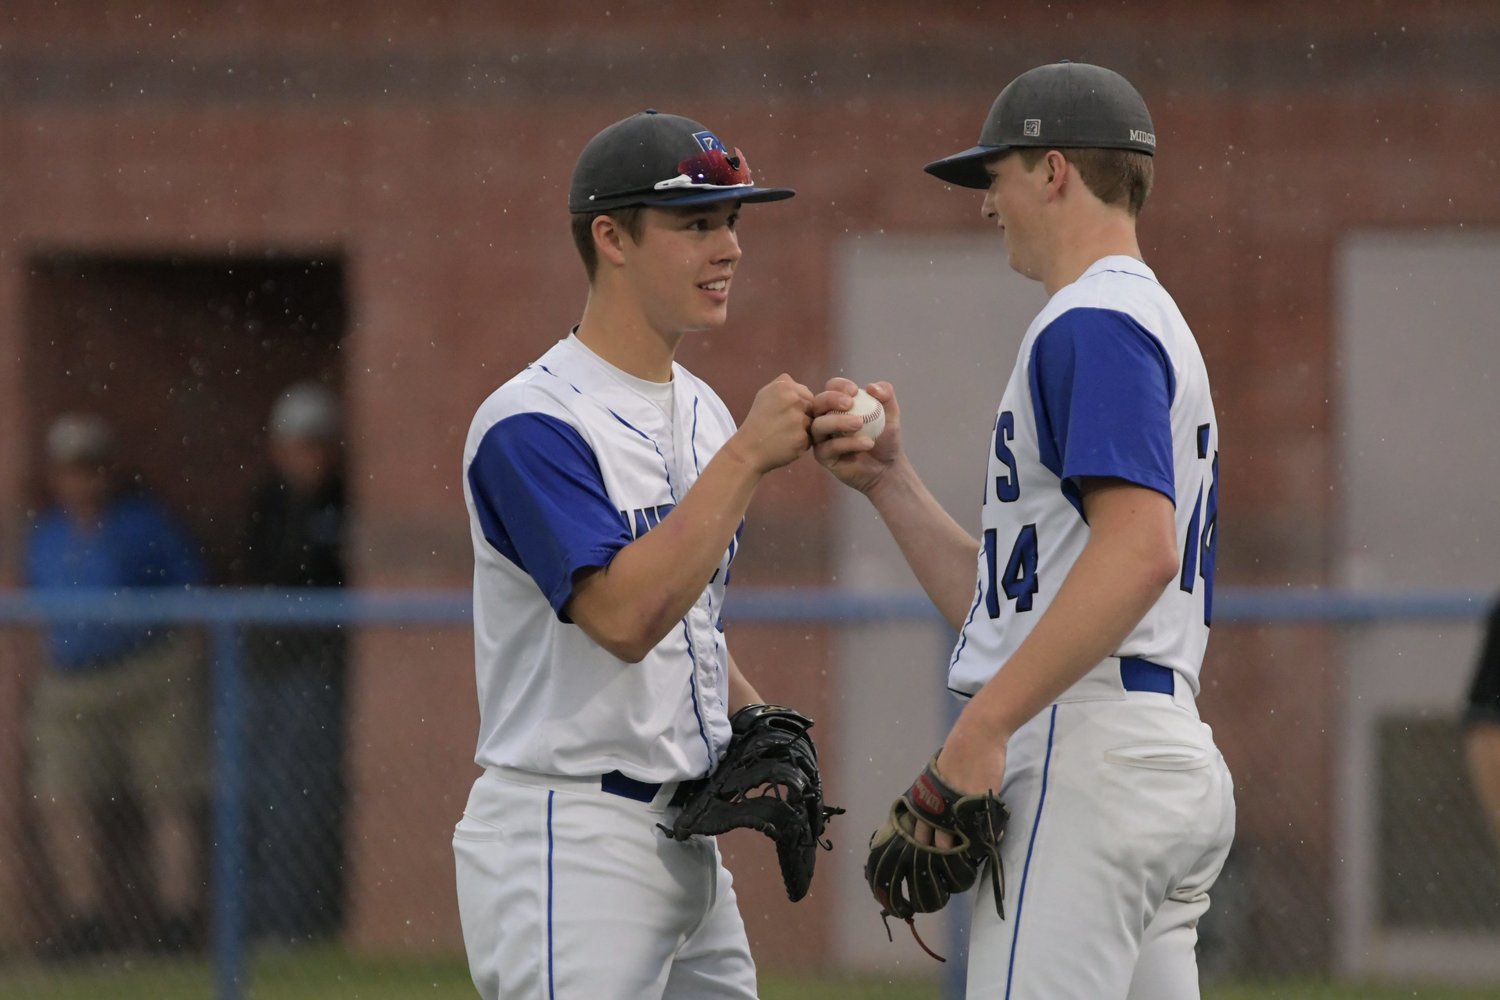 Putnam County first baseman Brayden Walter, left, and pitcher Gage Pearson fist-bump after an out during the Class 2 semifinal game against Marionville.